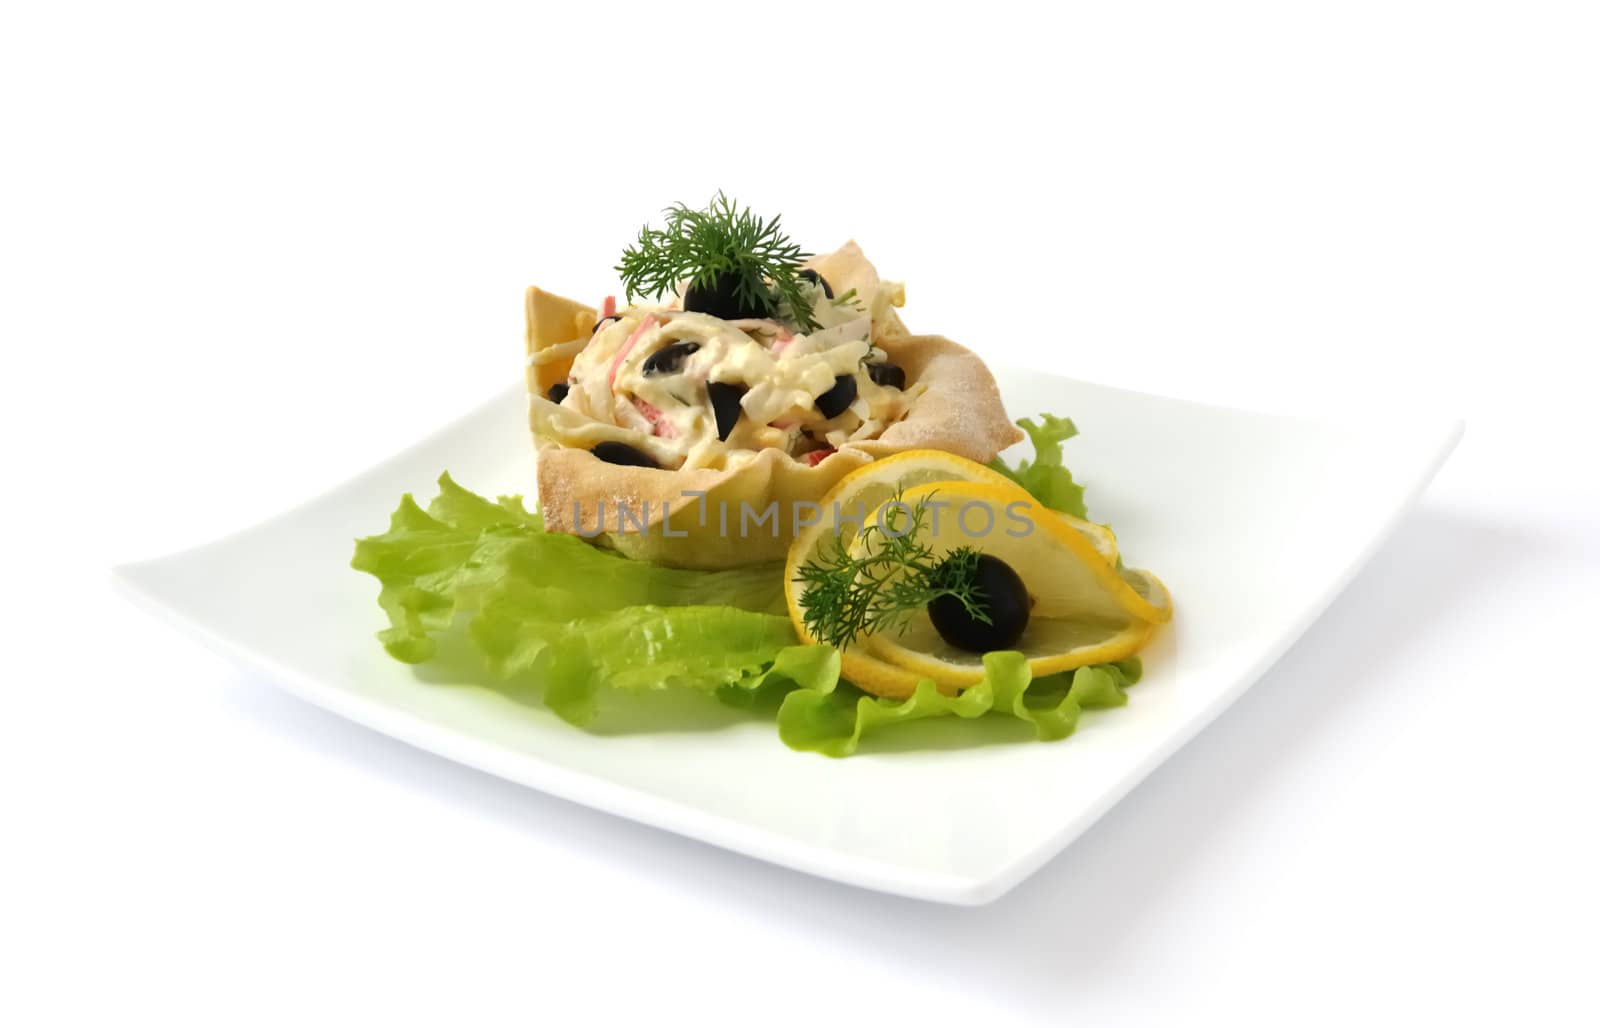 Salad with crab meat in a basket by Apolonia